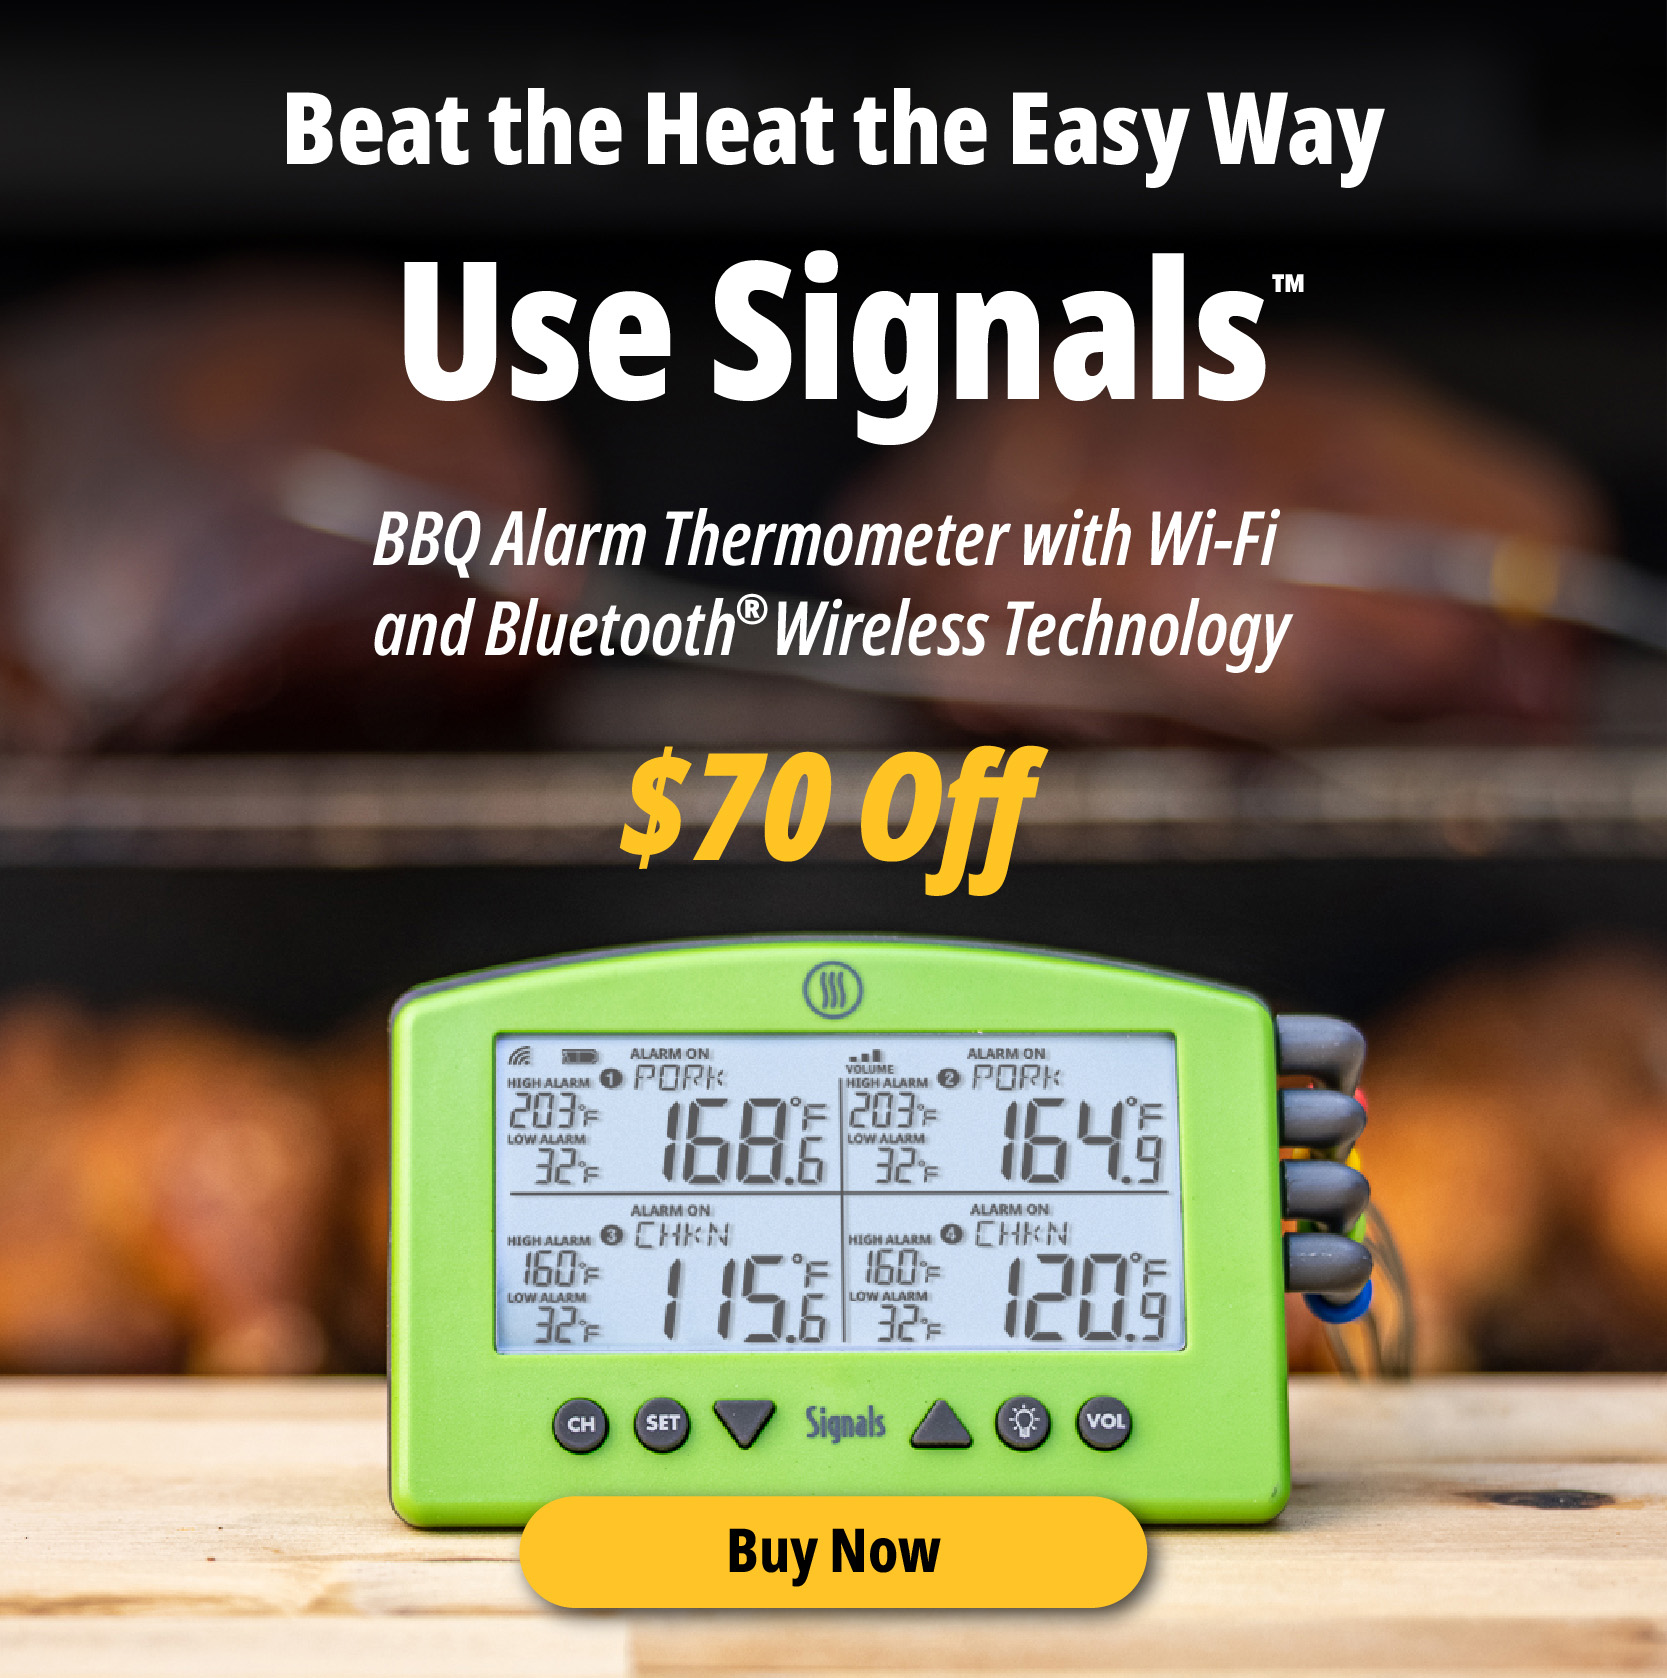 ThermoWorks Signals BBQ Alarm Thermometer with Wi-Fi and Bluetooth Wireless Technology - Orange